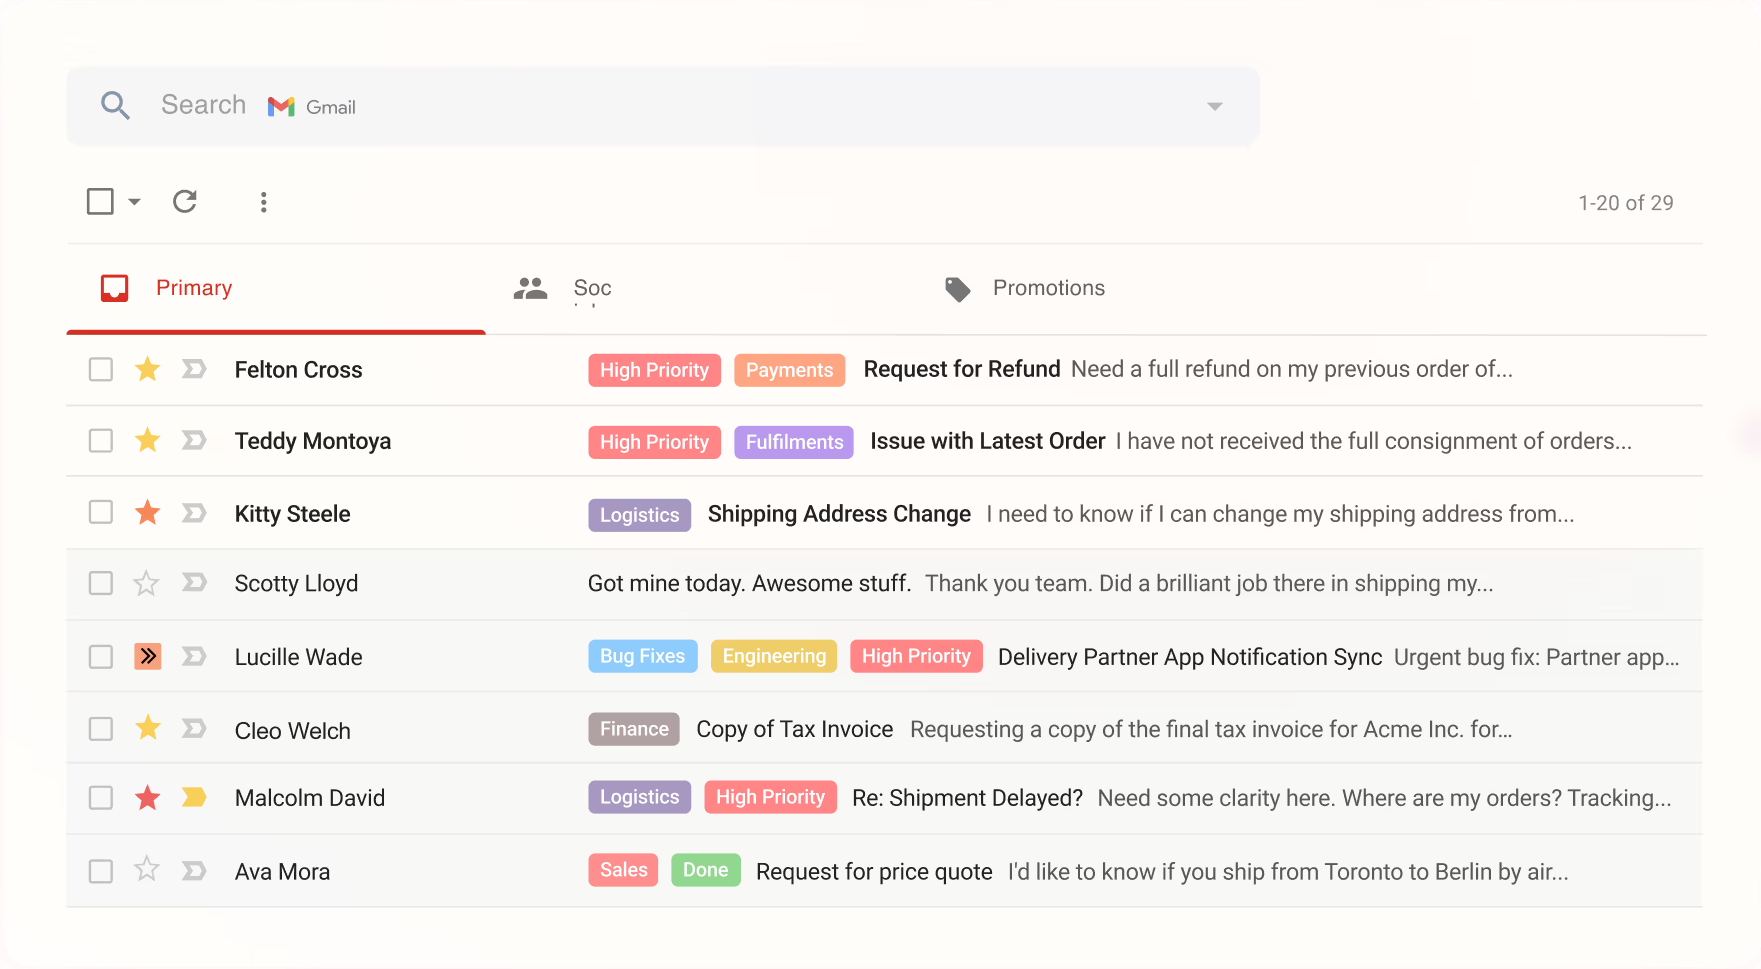 Hiver - Best for Gmail-Based Help Desk